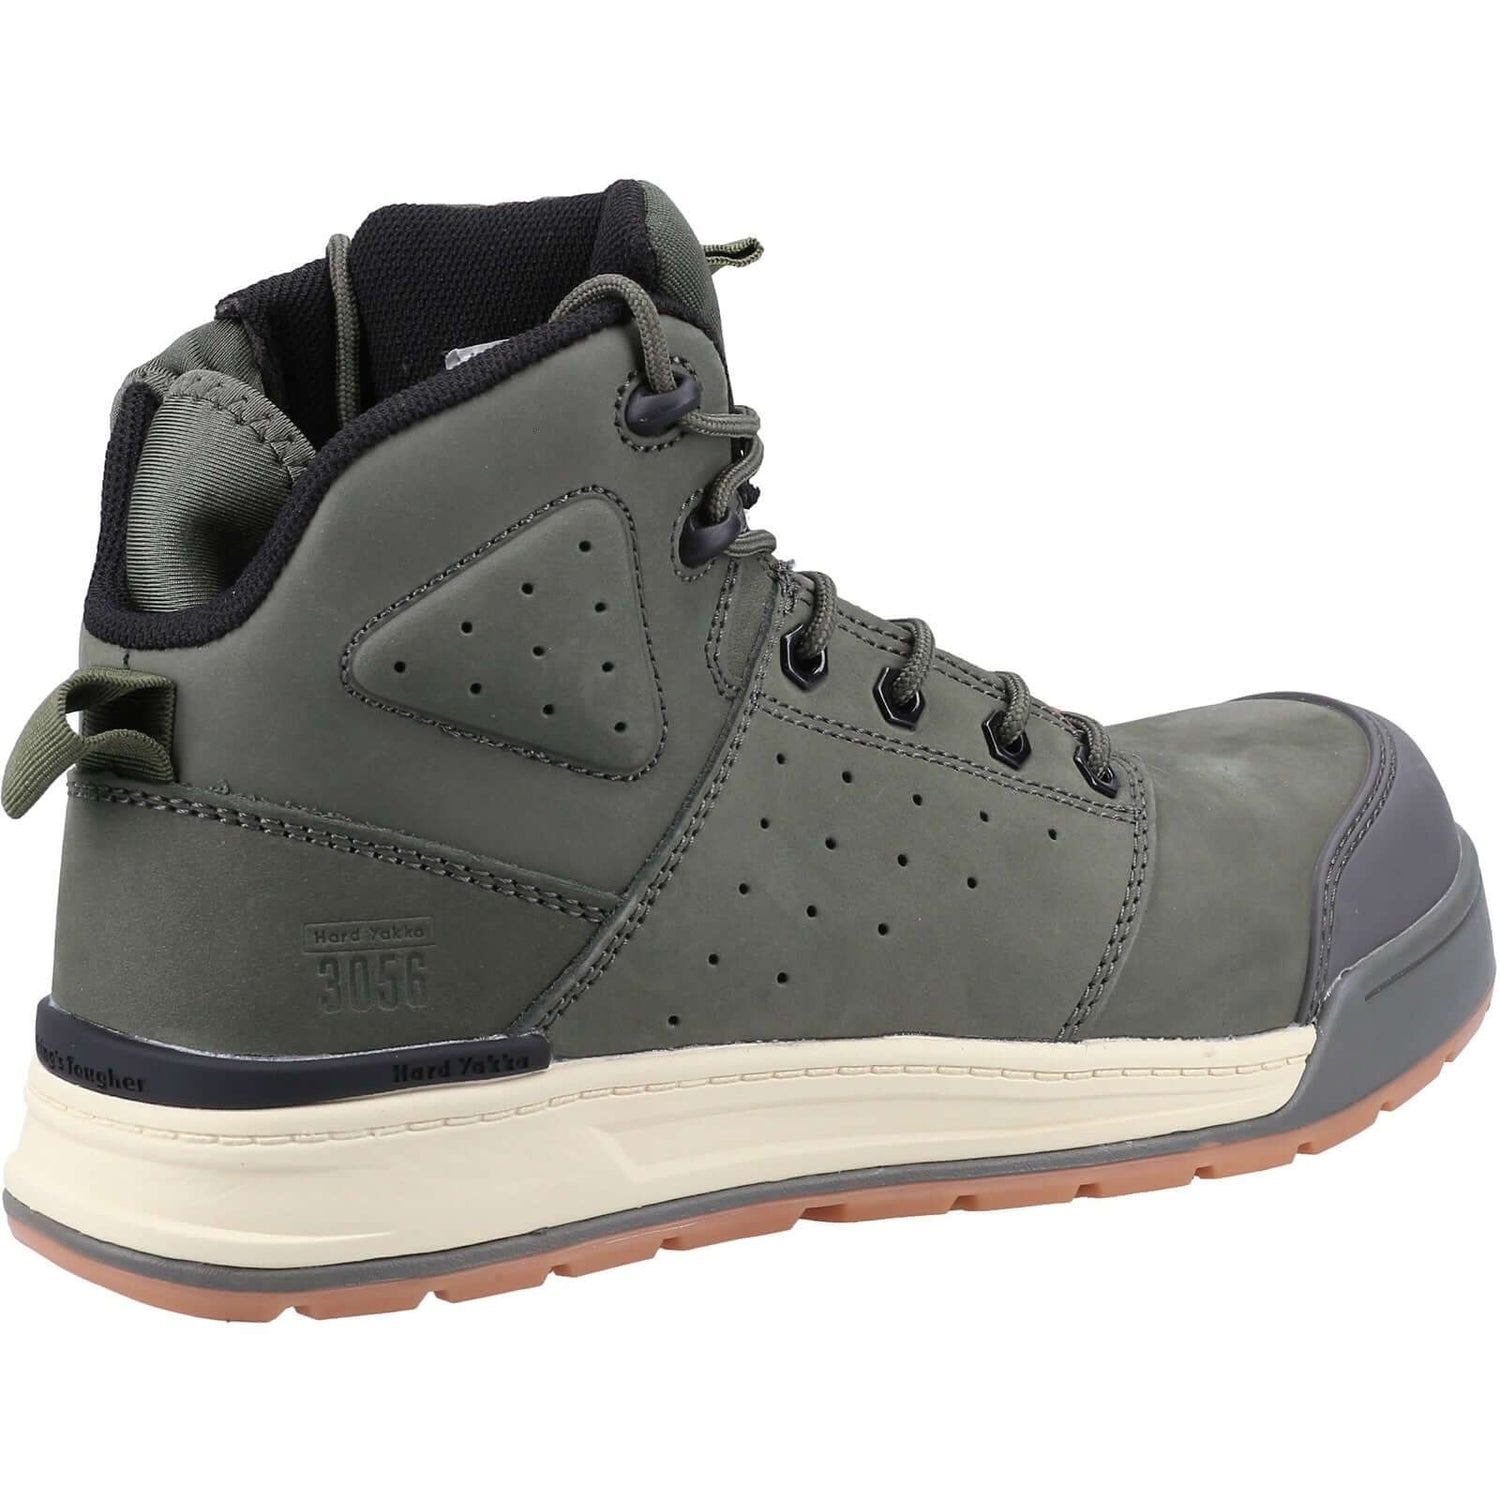 Hard Yakka 3056 Lace Zip Safety Boot in Olive 